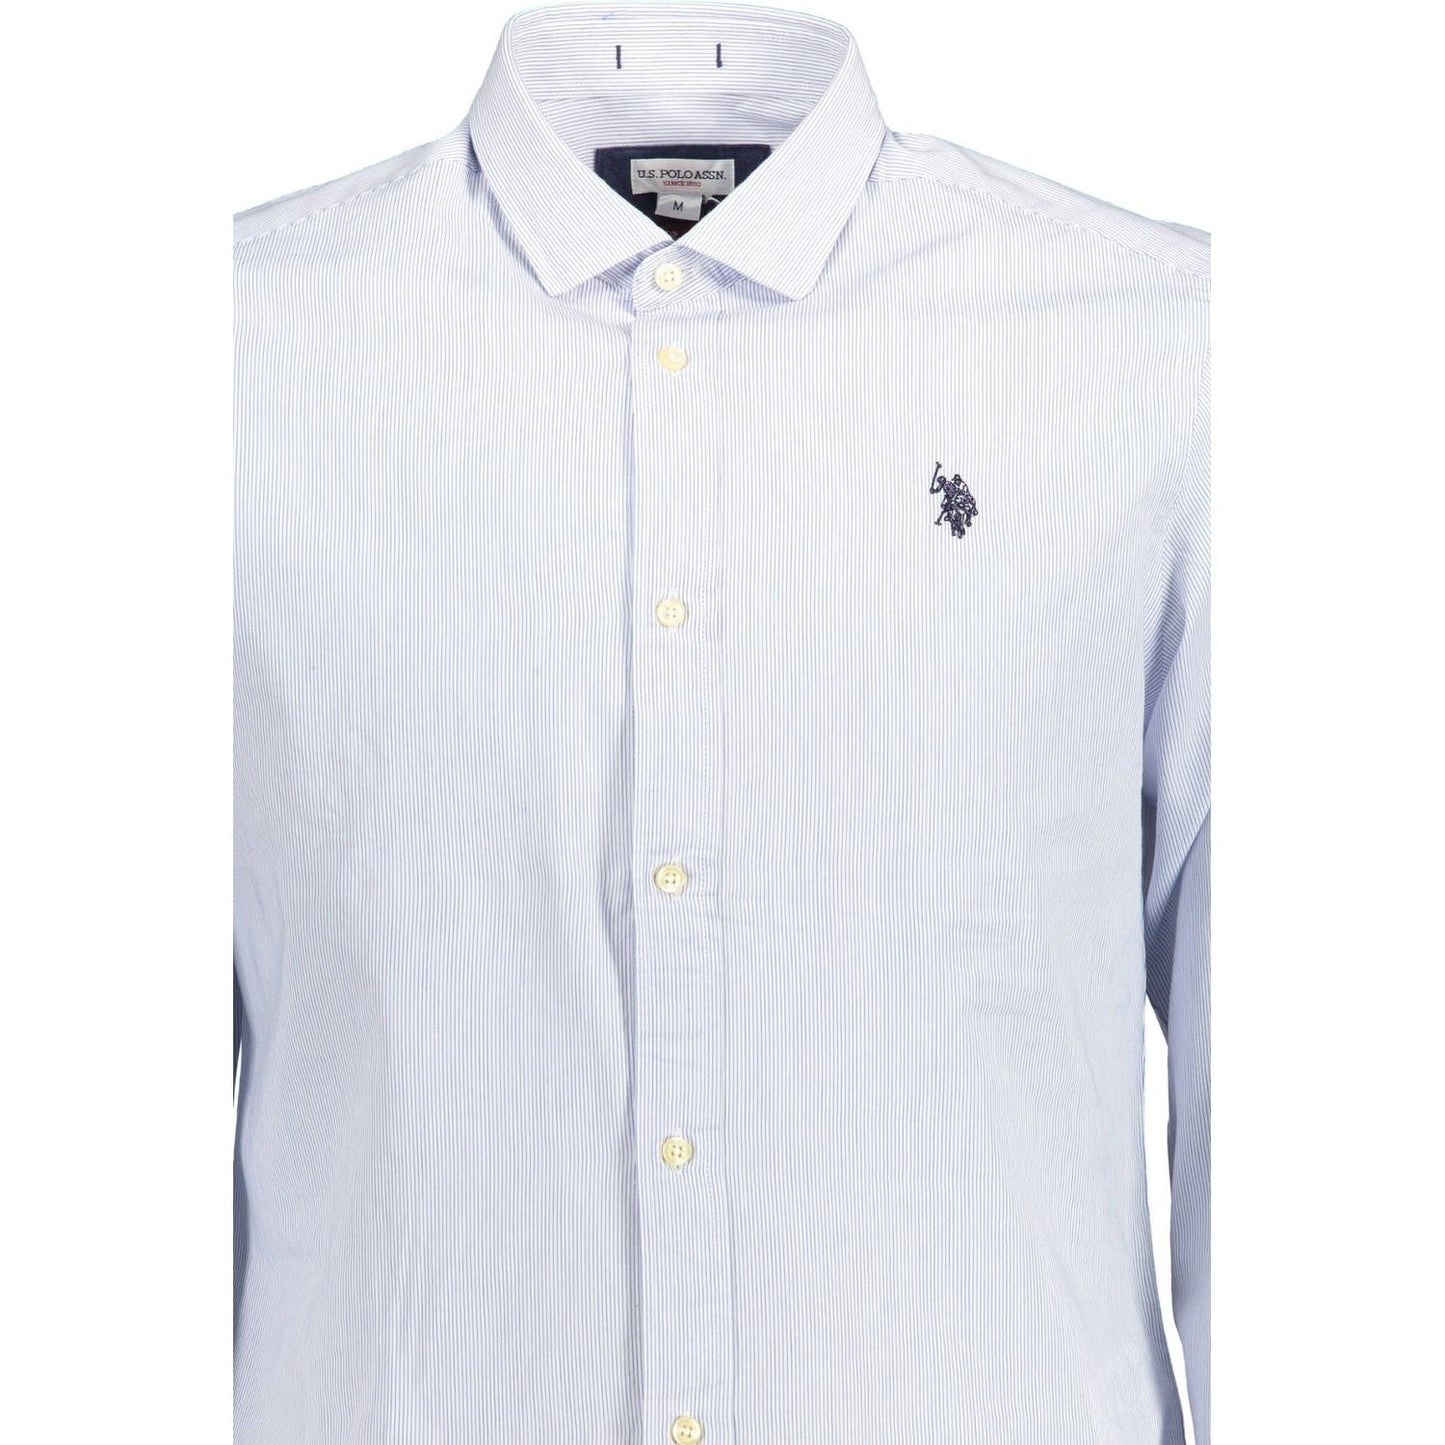 U.S. POLO ASSN. Slim Fit French Collar Embroidered Shirt slim-fit-french-collar-embroidered-shirt